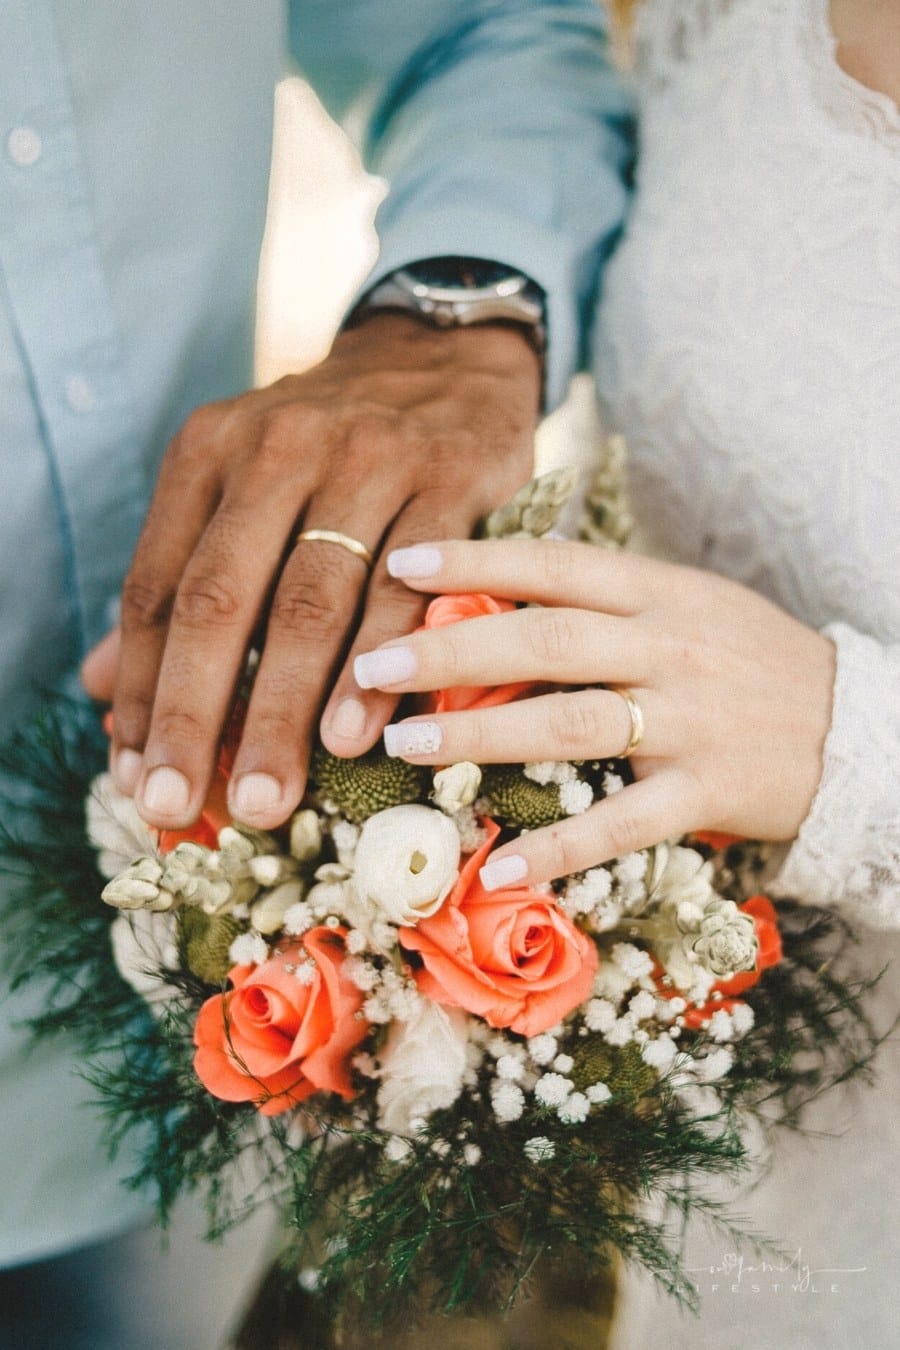 bride and groom's hands with wedding bands over bouquet